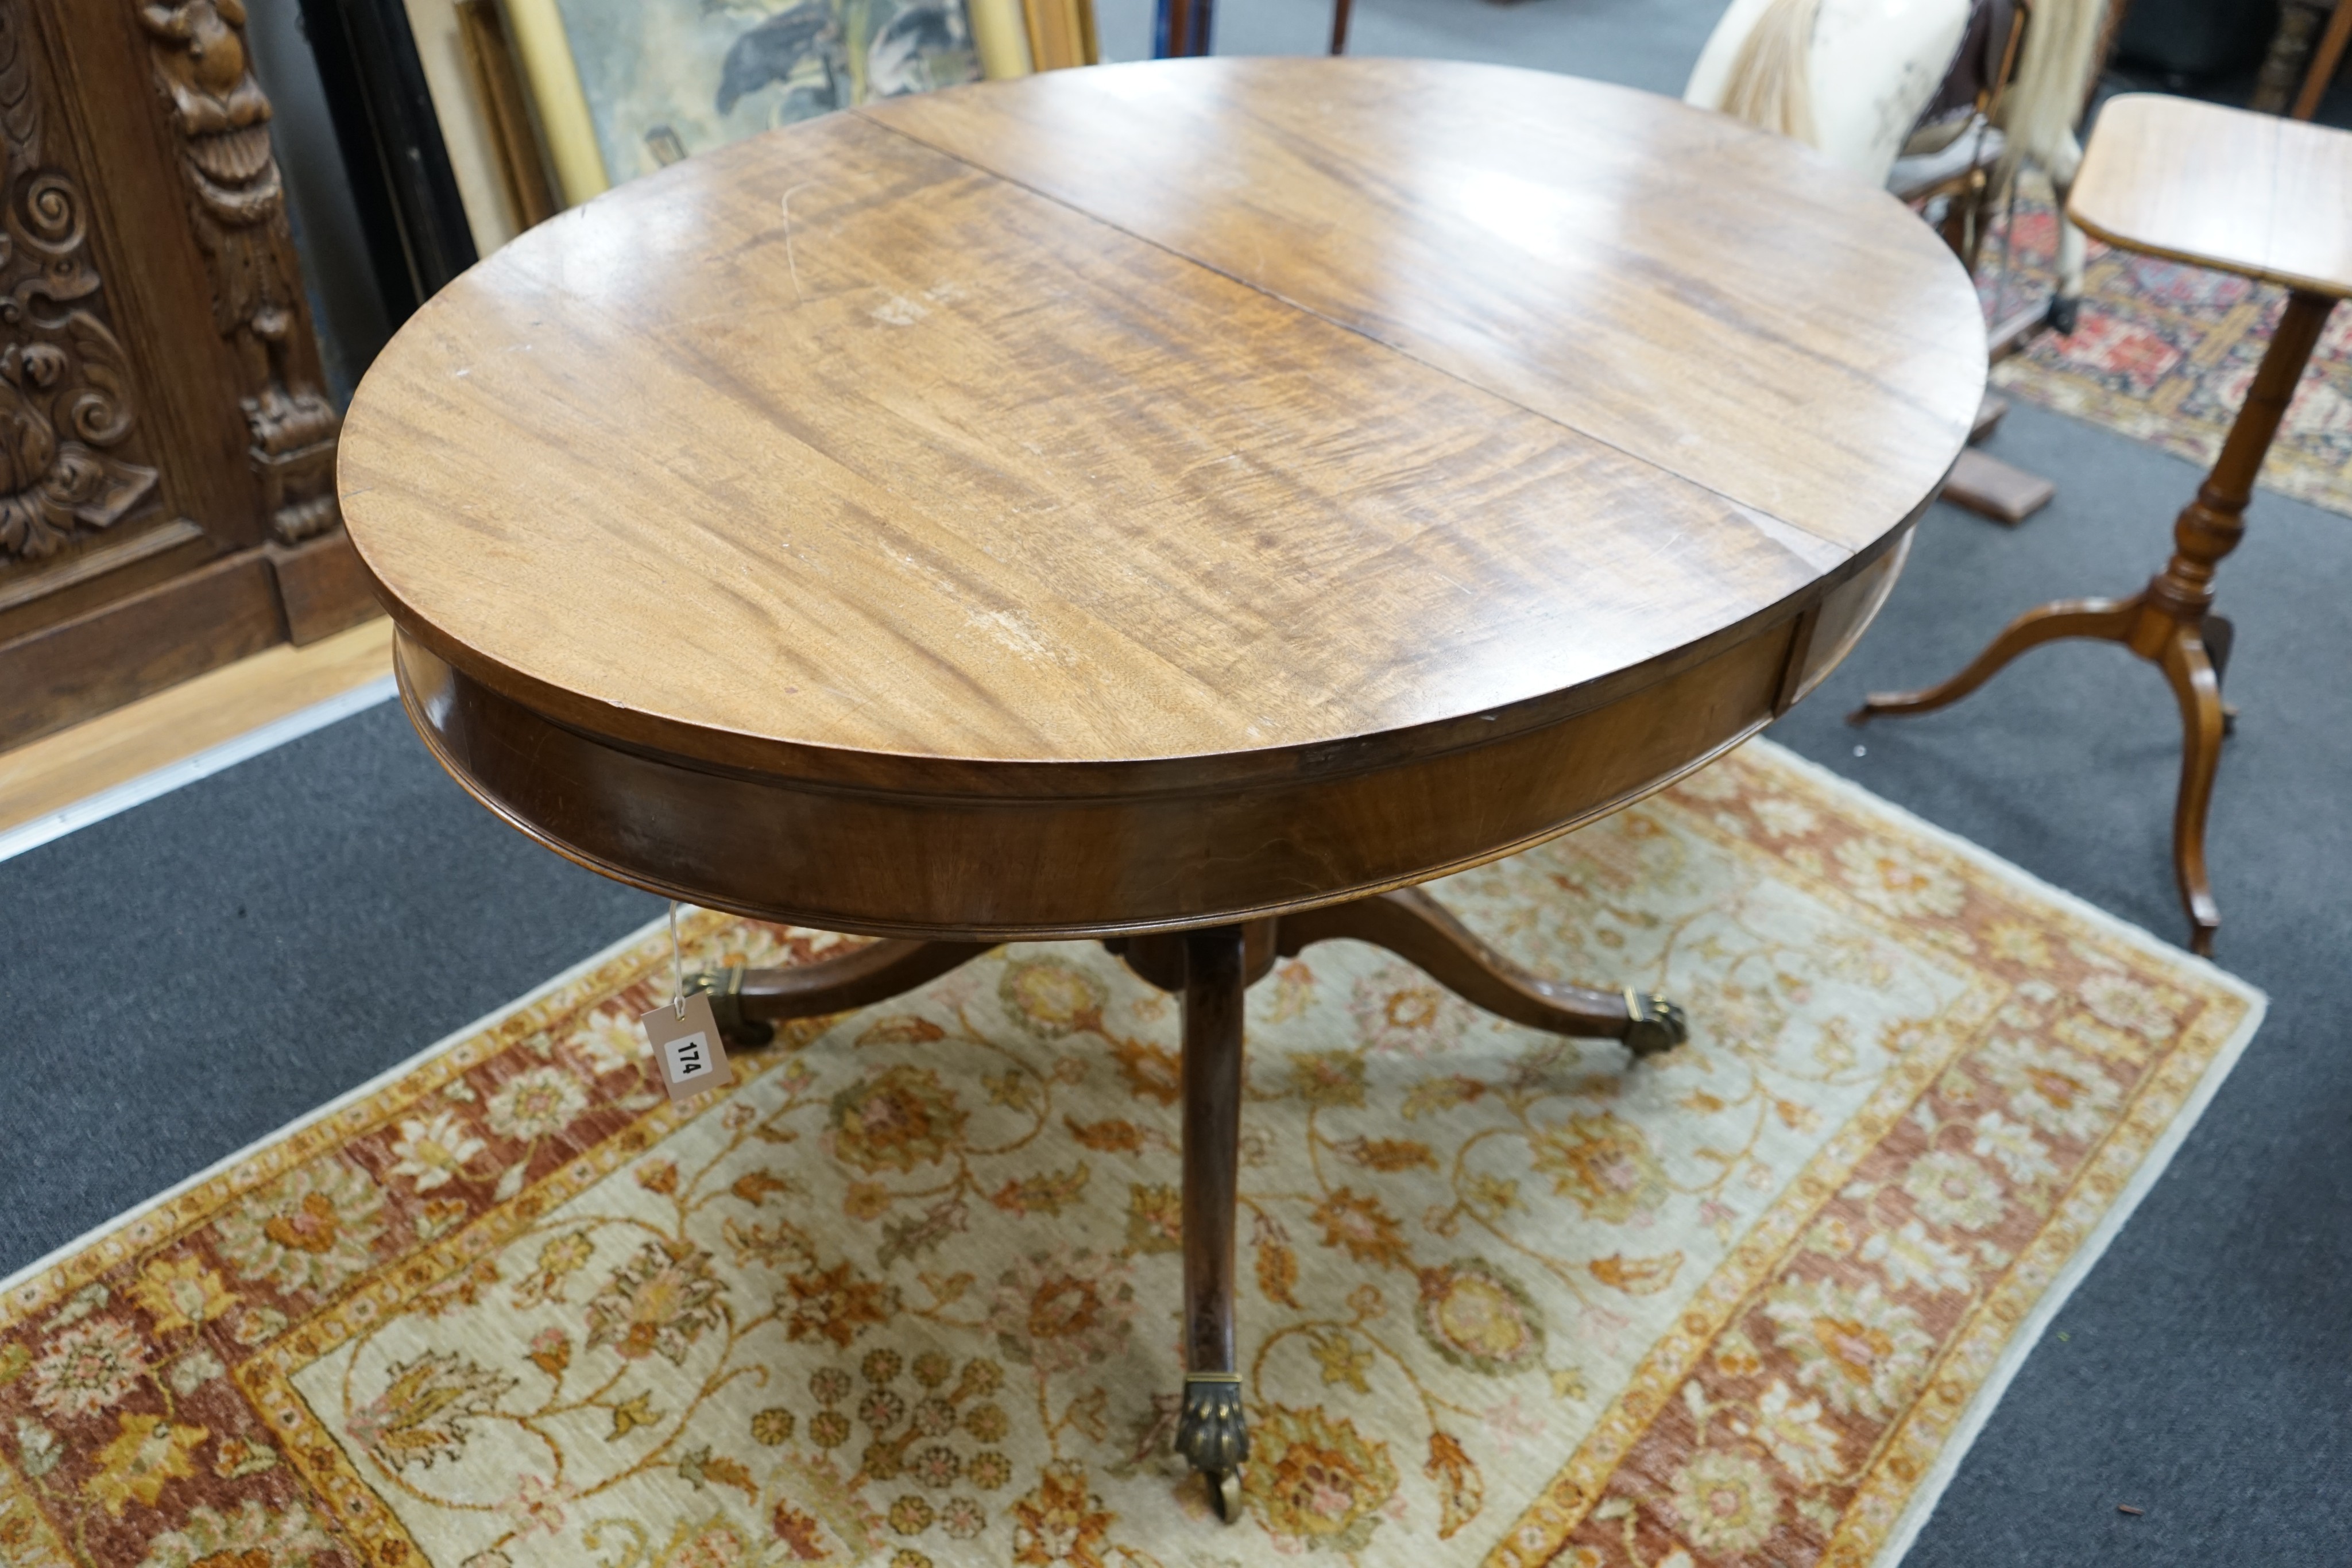 A small George III style oval mahogany extending dining table, (no leaves) width 126cm, depth 91cm, height 77cm